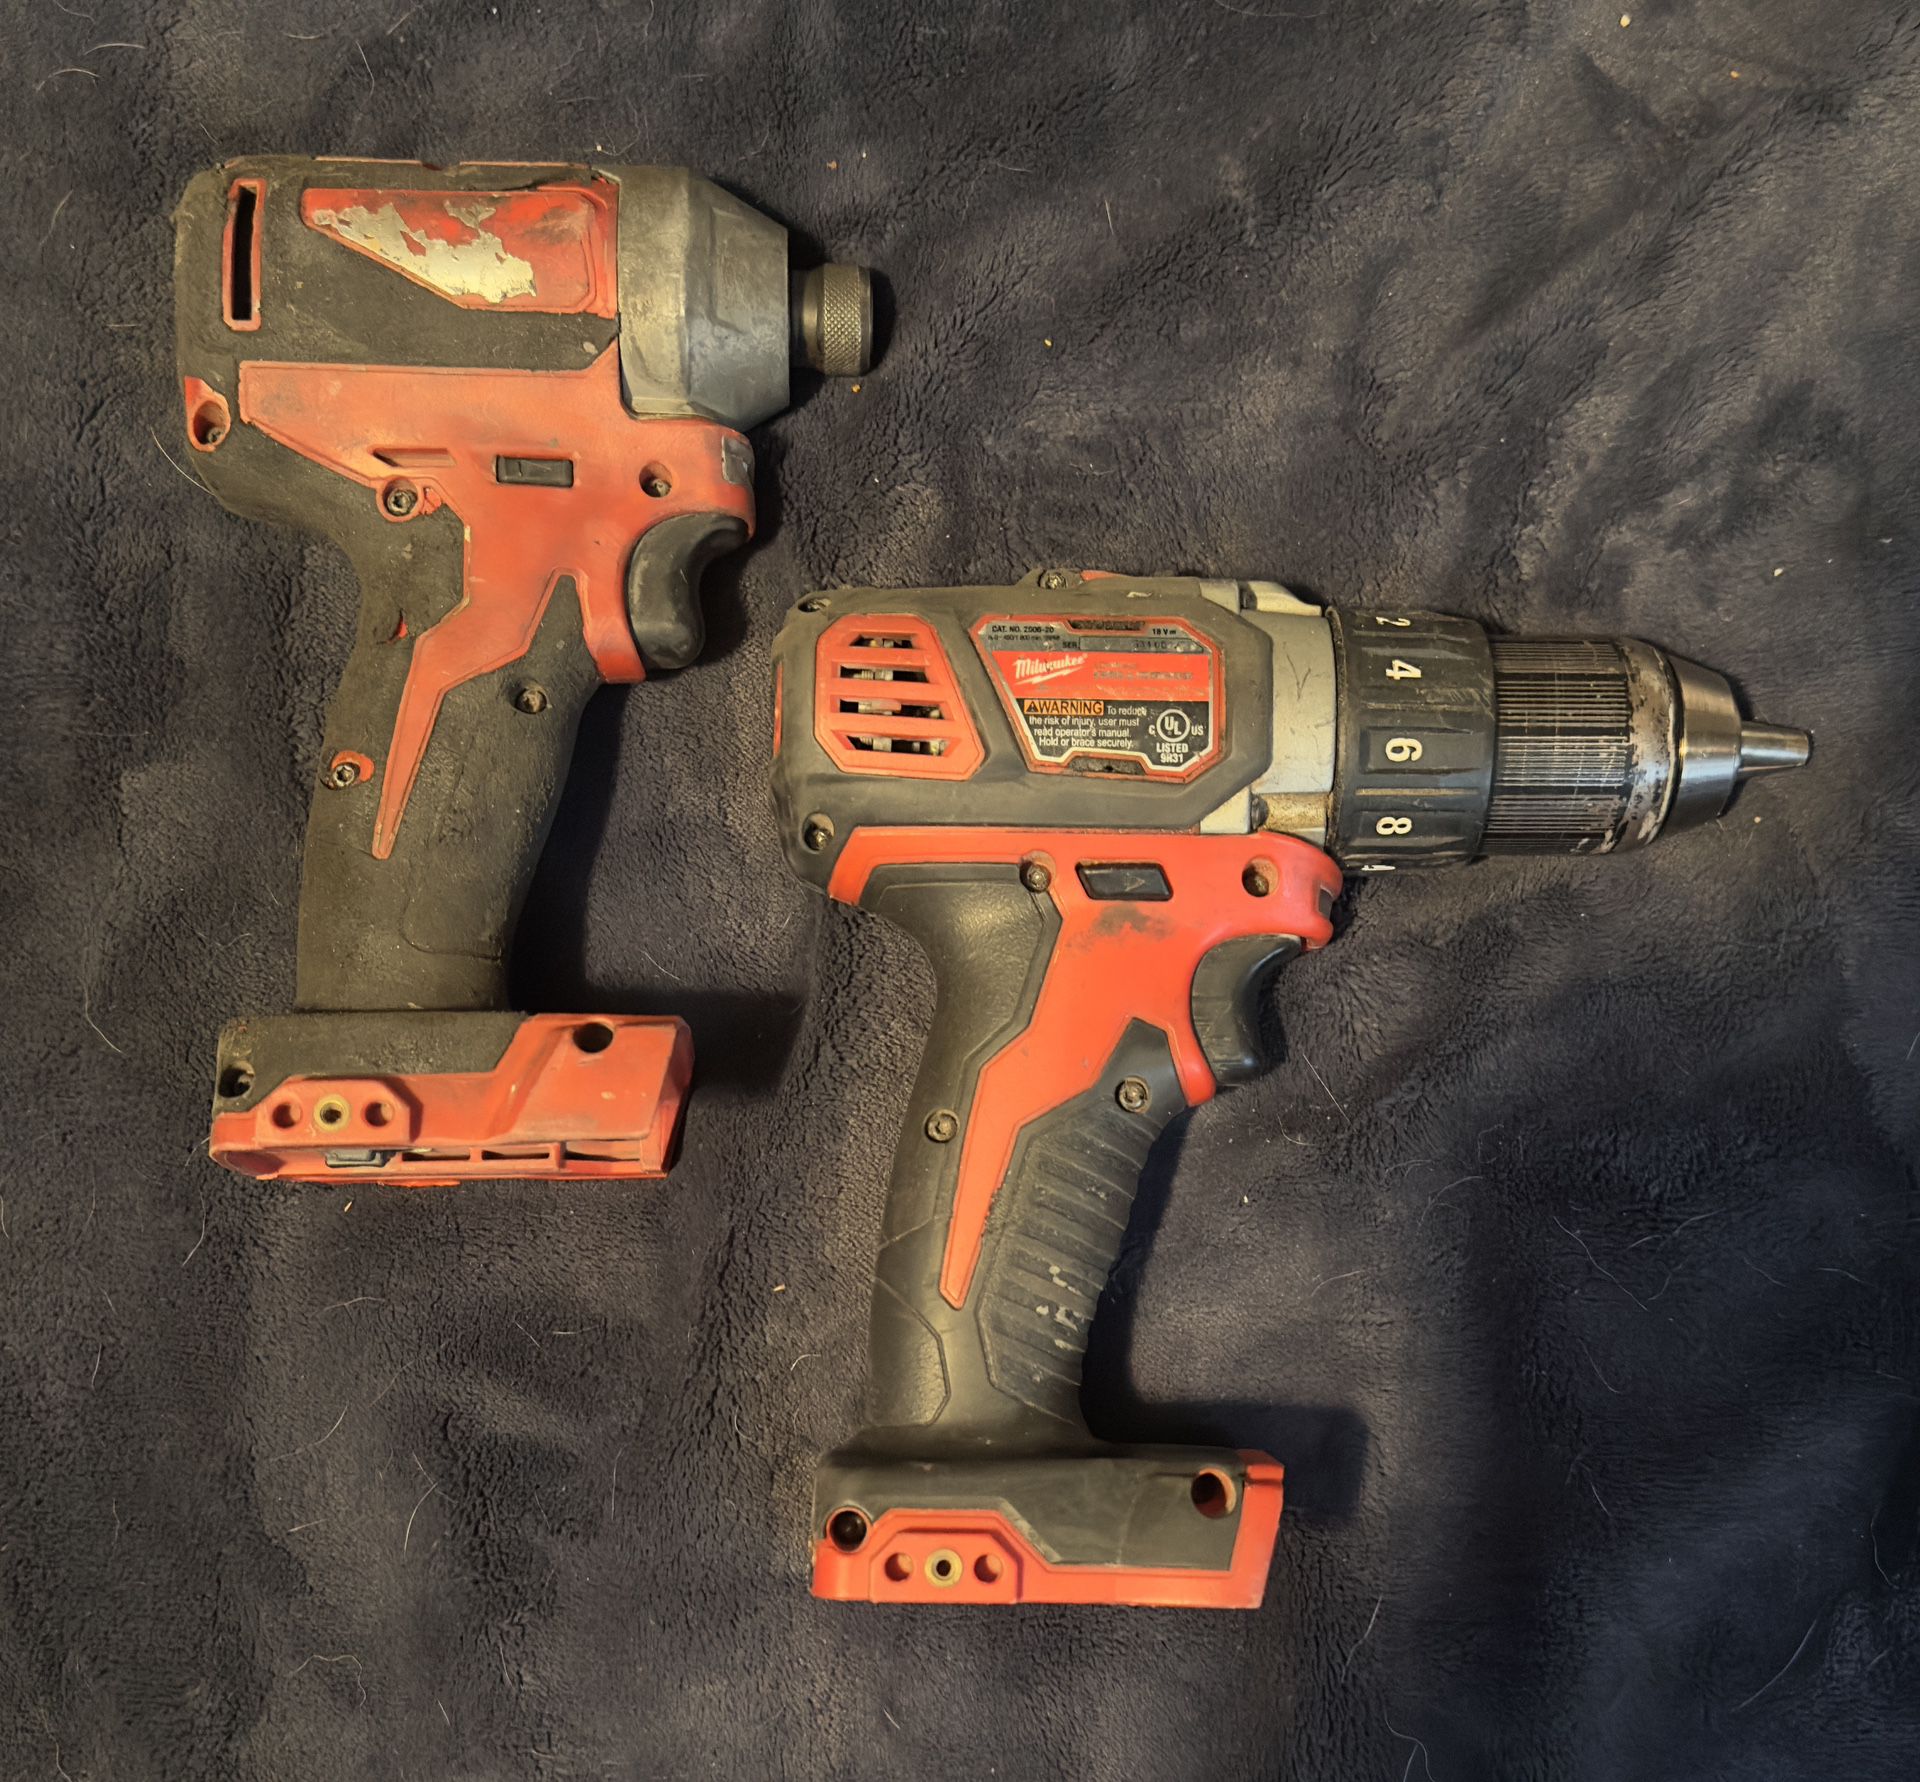 Used Milwaukee 18 Volt 1/2" Drill And 1/4" Impact Drill (Tools Only)